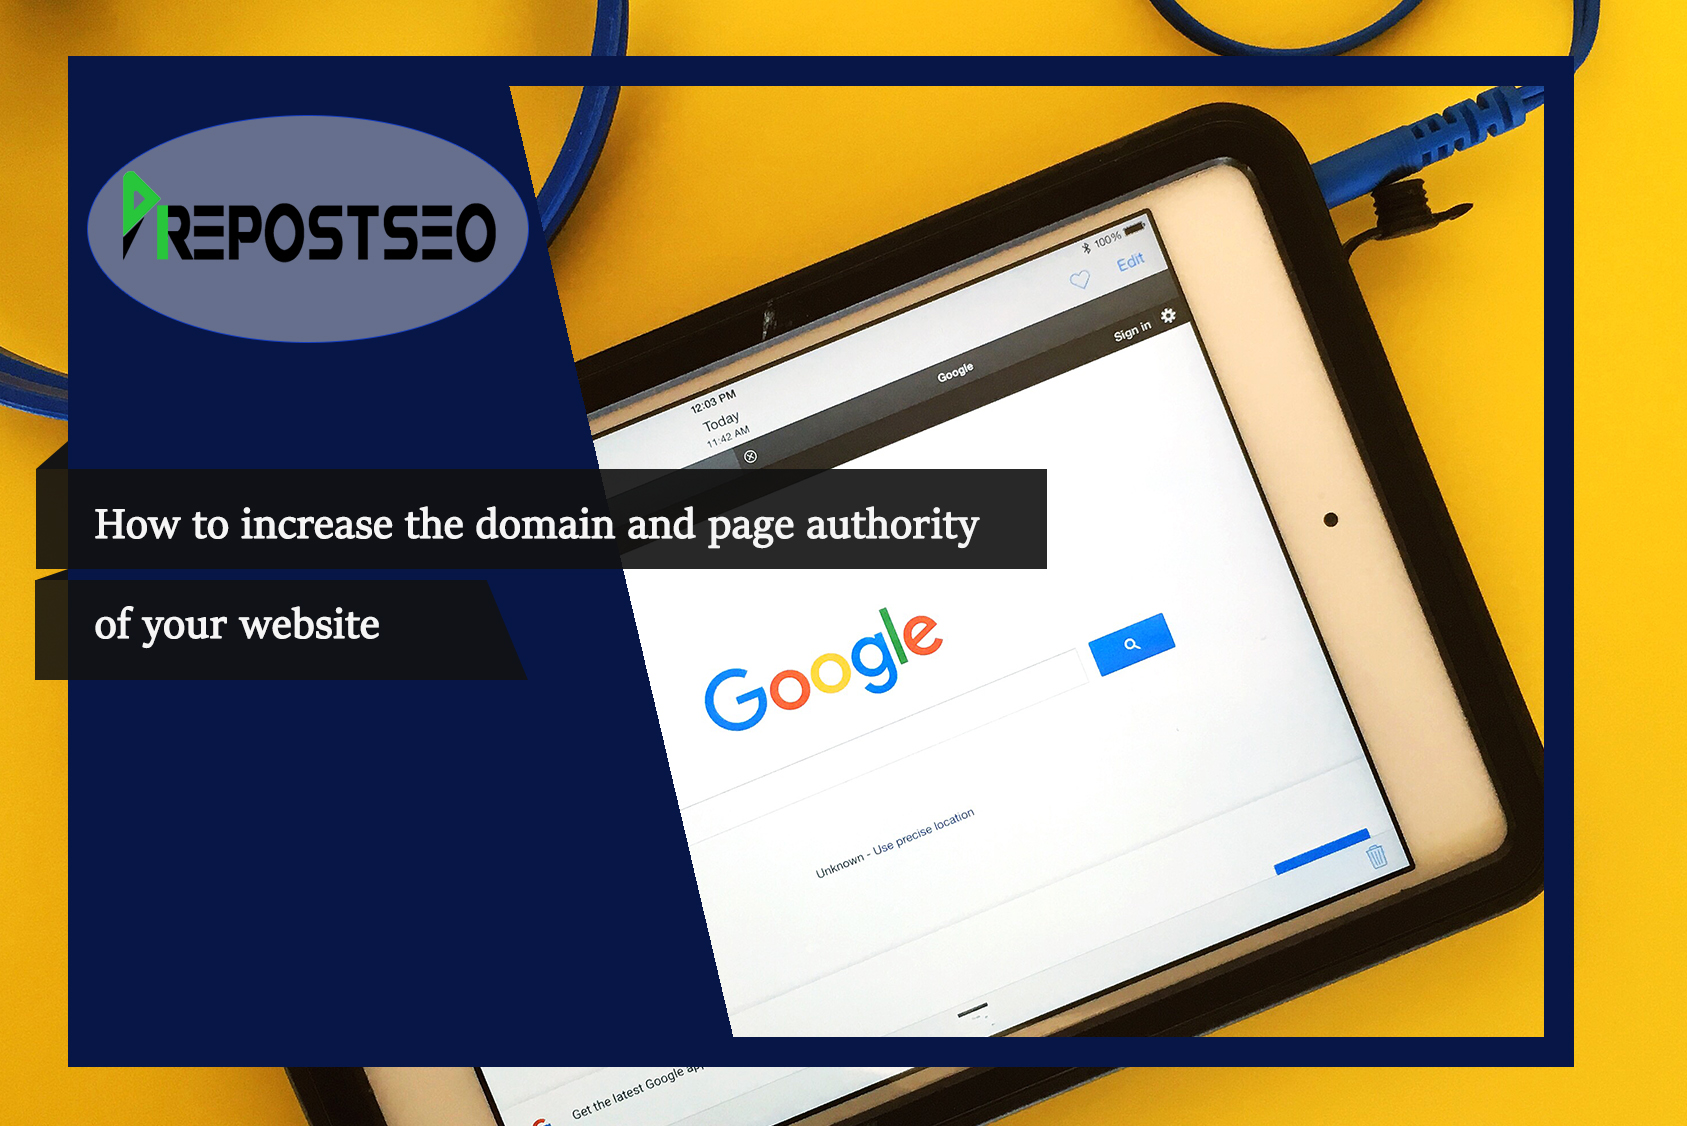 How to increase the domain and page authority